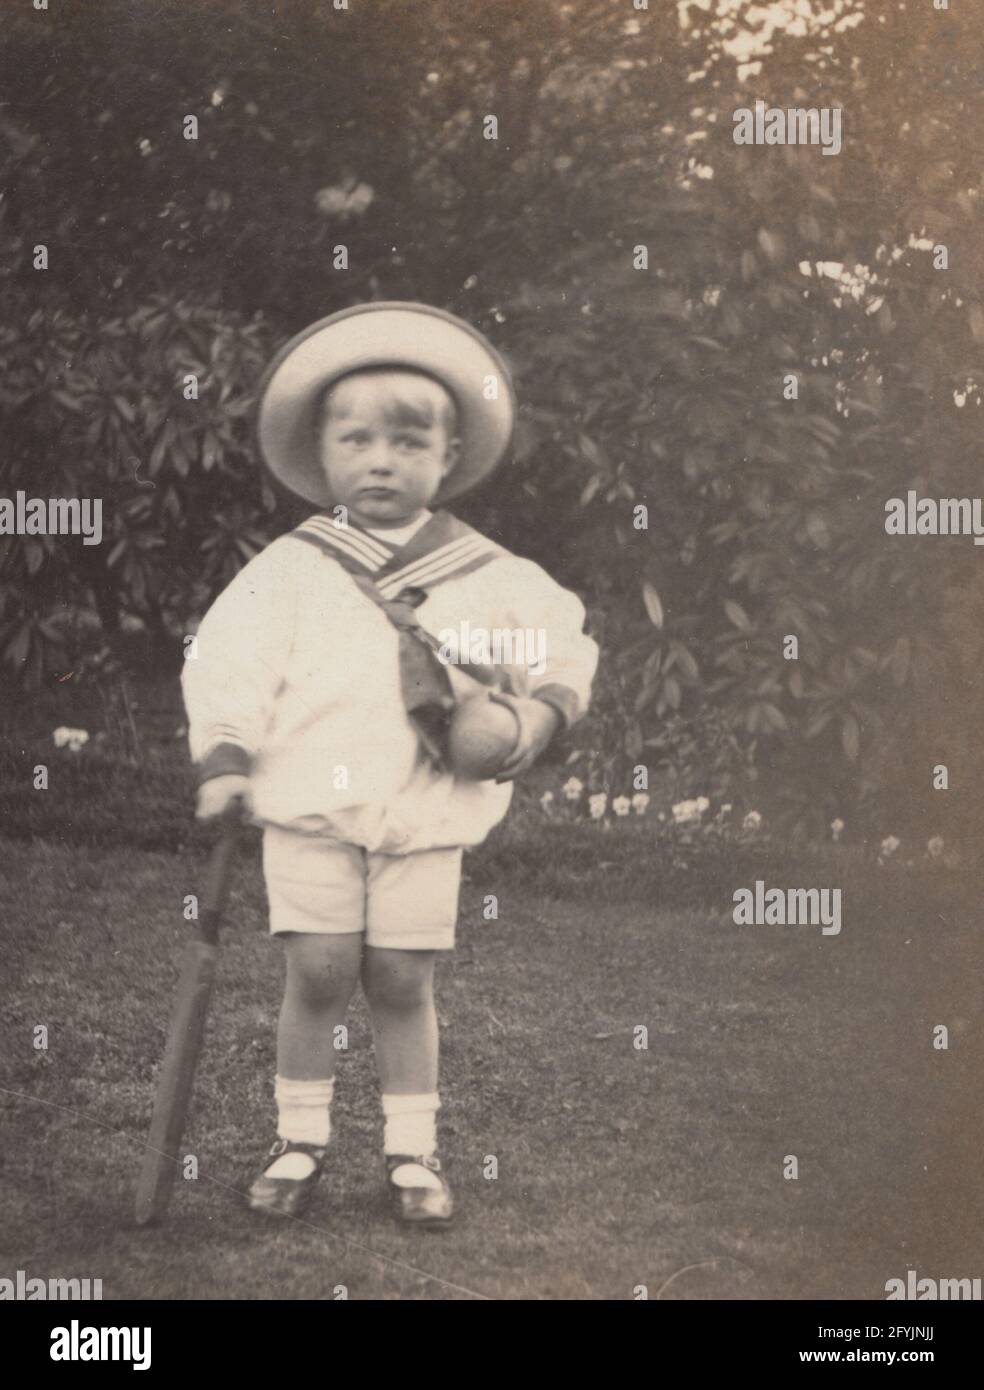 Vintage early 20th century photographic postcard showing a young child stood in a garden wearing a sailors outfit. Holding a cricket bat and ball. Stock Photo